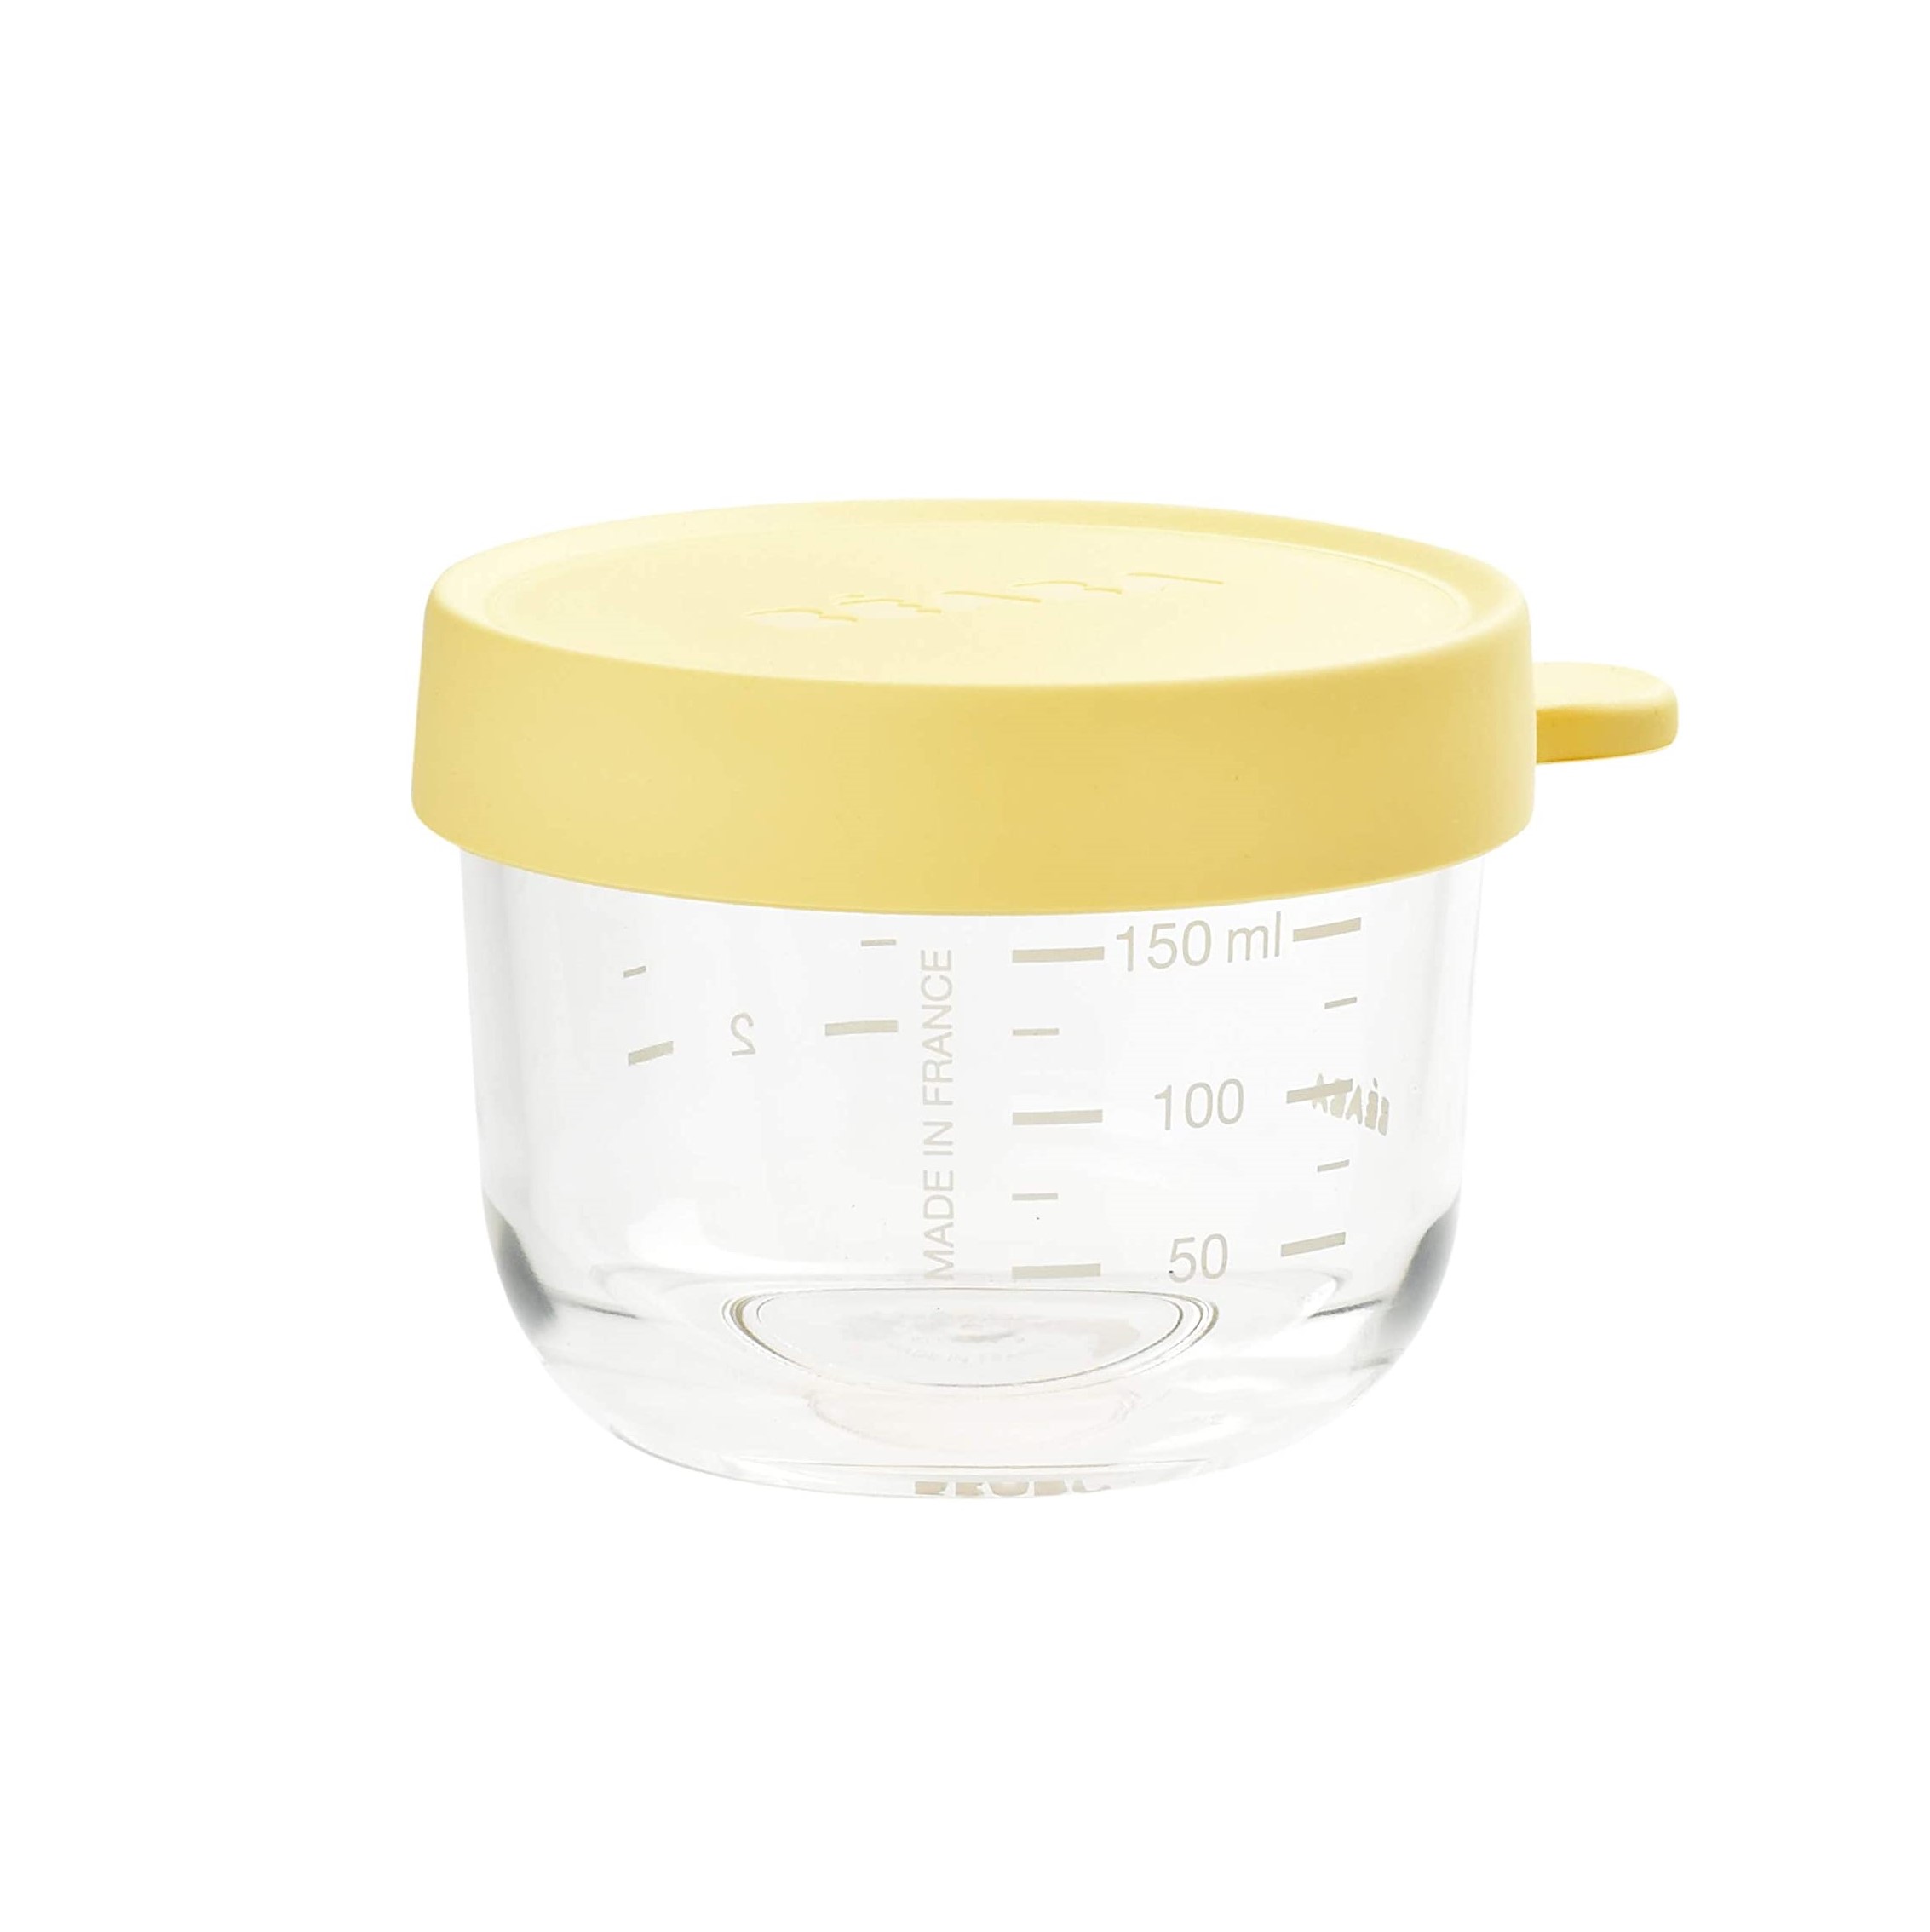 Beaba 150ml Conservation Jar in superior quality glass - Yellow (912651)